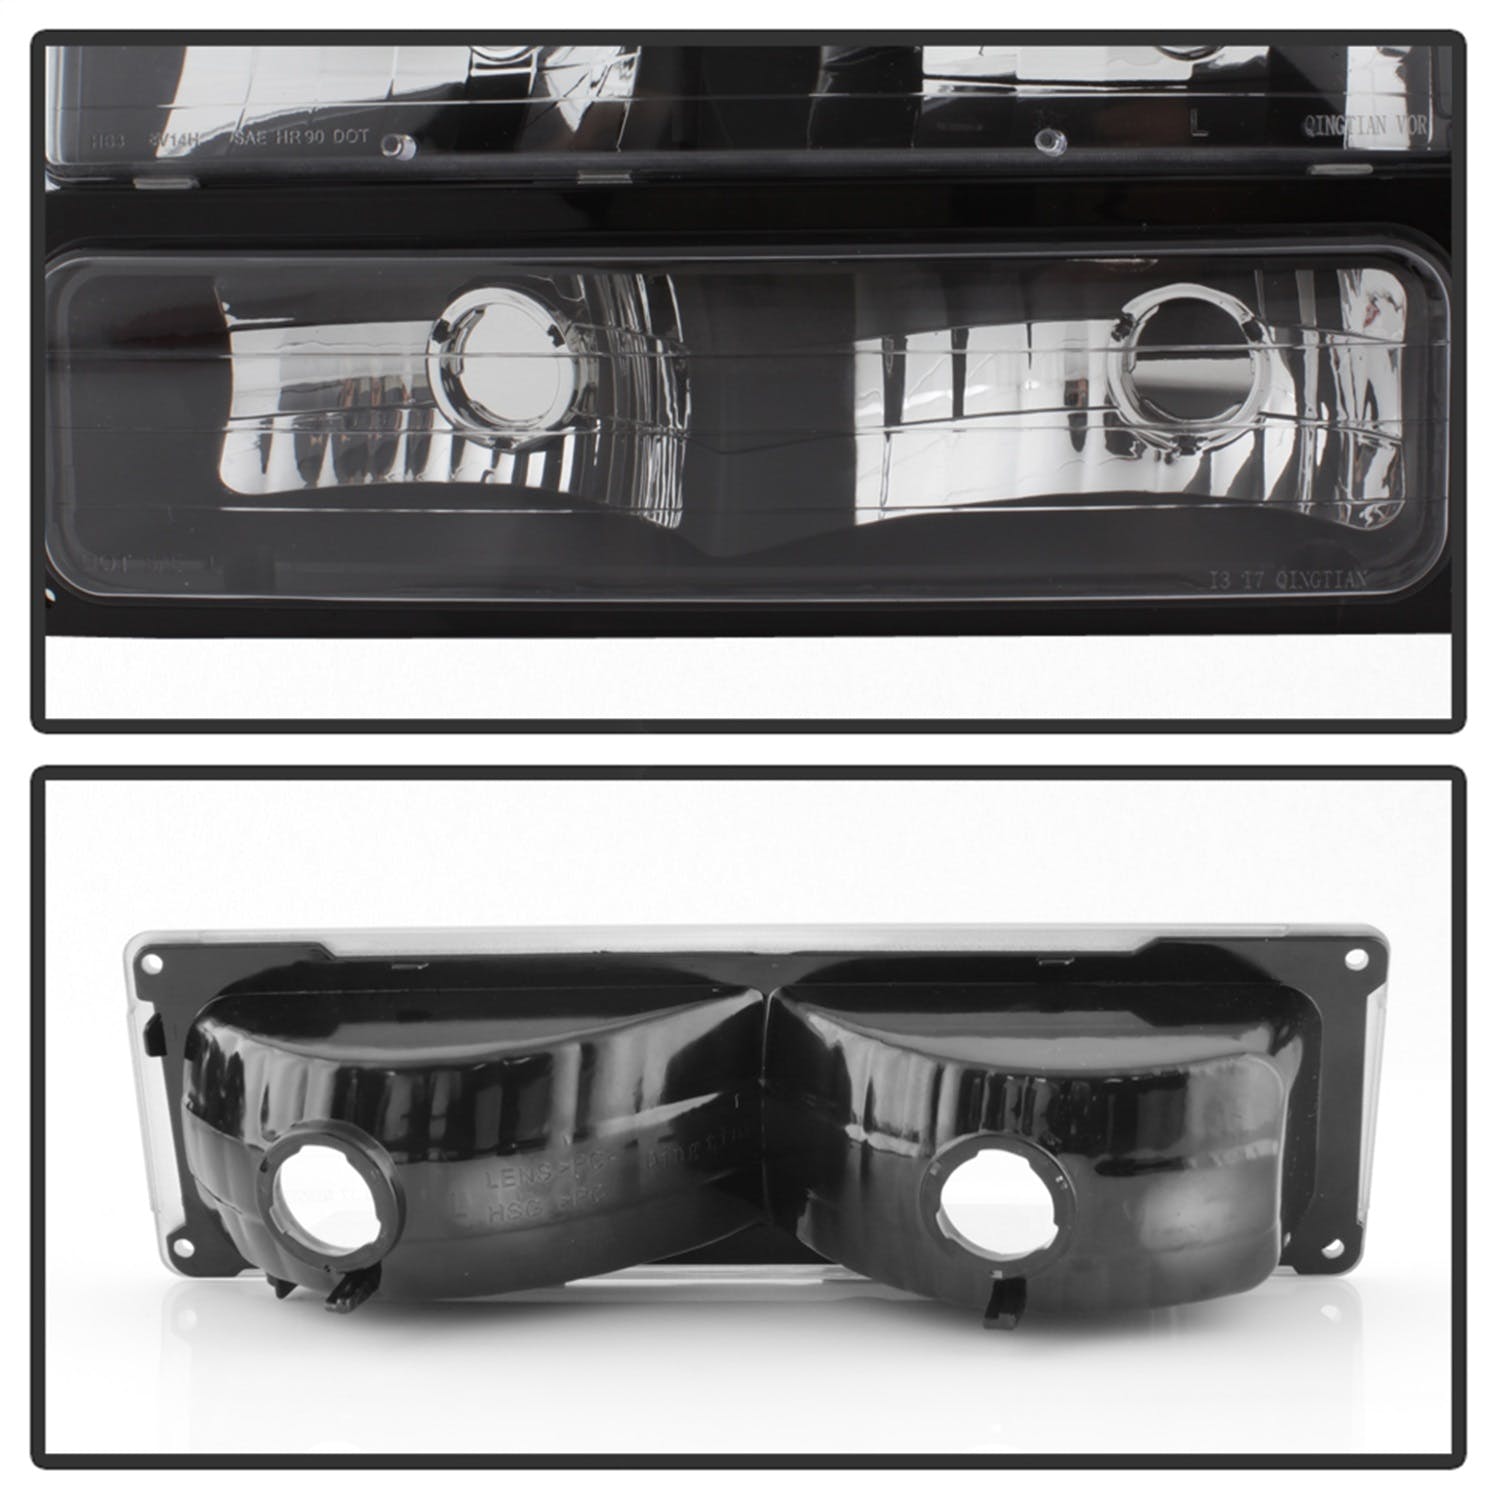 XTUNE POWER 5072221 Chevy C K Series 1500 2500 3500 94 98 Chevy Tahoe 95 99 Chevy Silverado 94 98 Chevy Suburban 94 98 Chevy Suburban 94 98 ( Not Compatible With Seal Beam Headlight ) Headlights with Corner and Parking Lights 8pcs sets Black